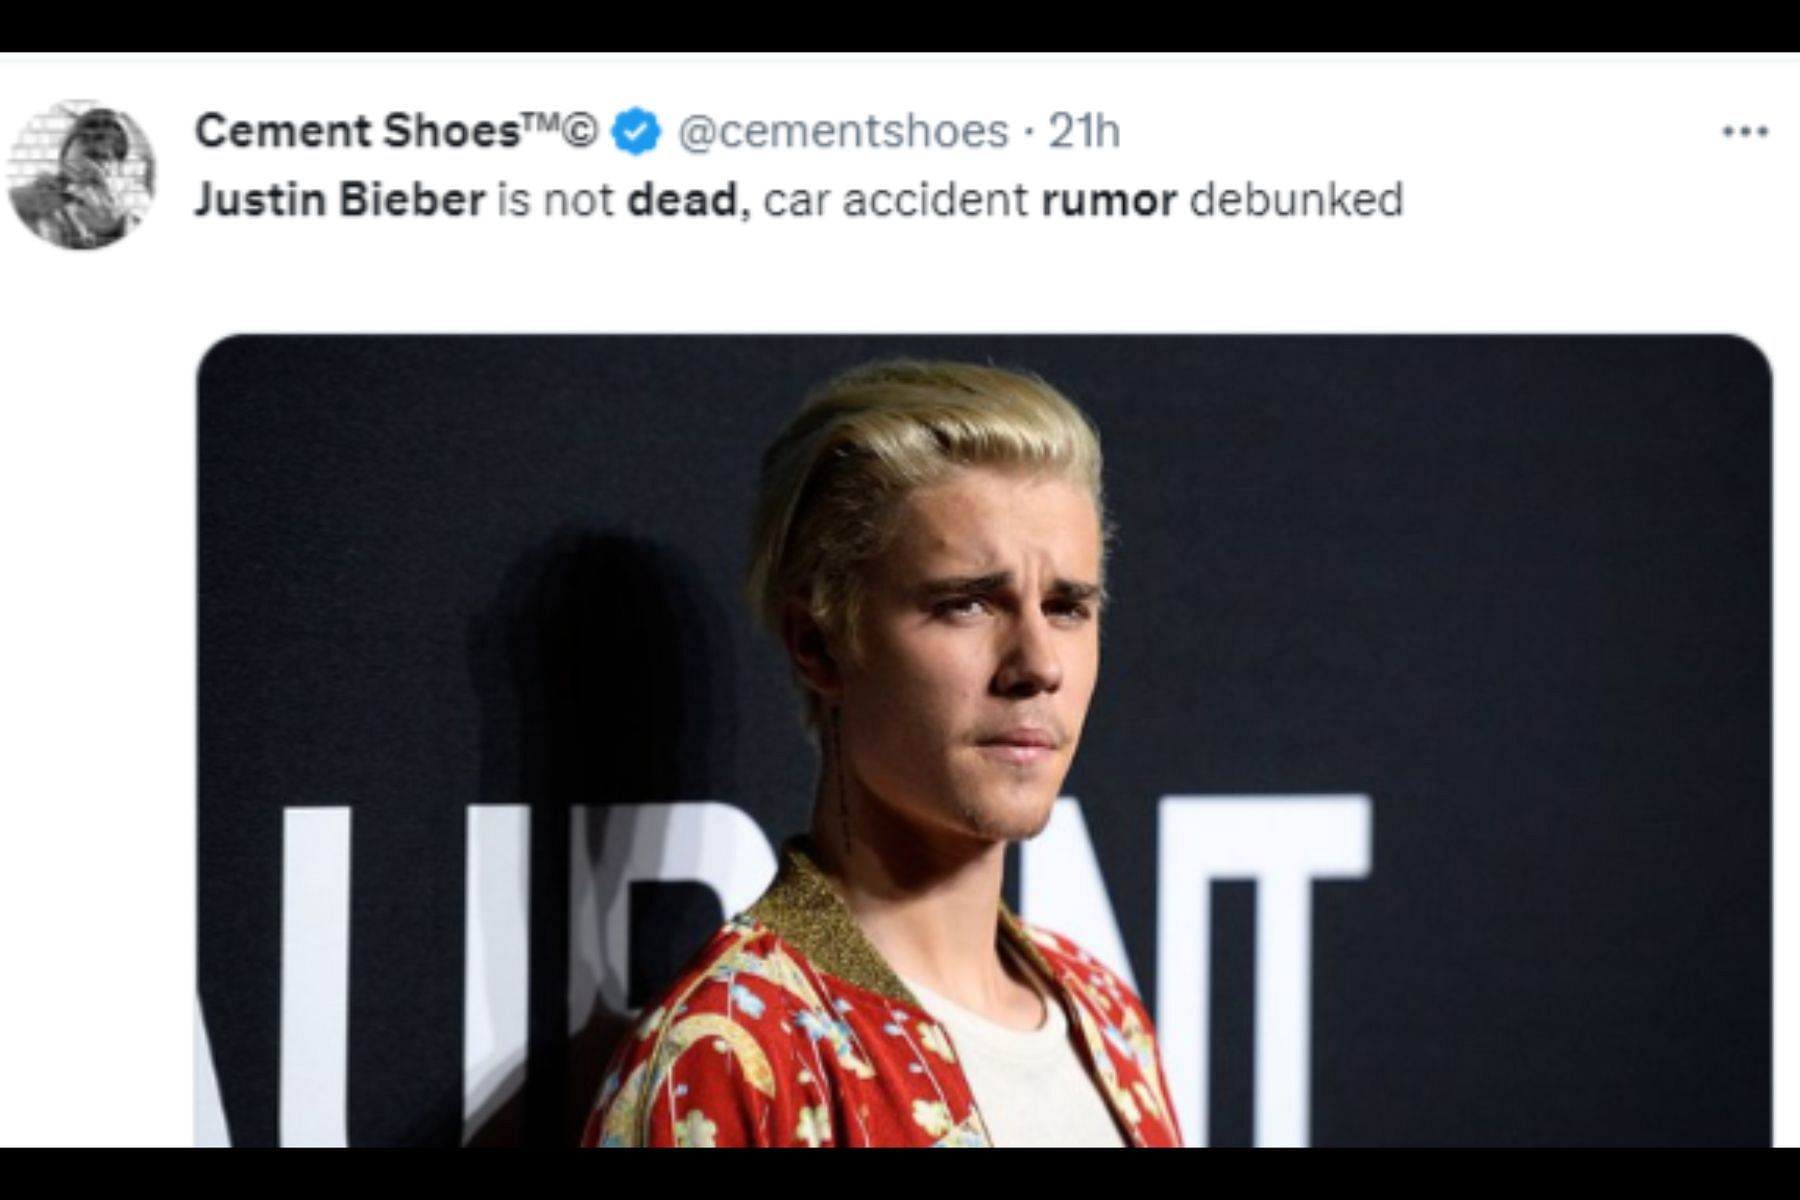 Justin Bieber is alive and well. (Image via Twitter/@cementshoes)